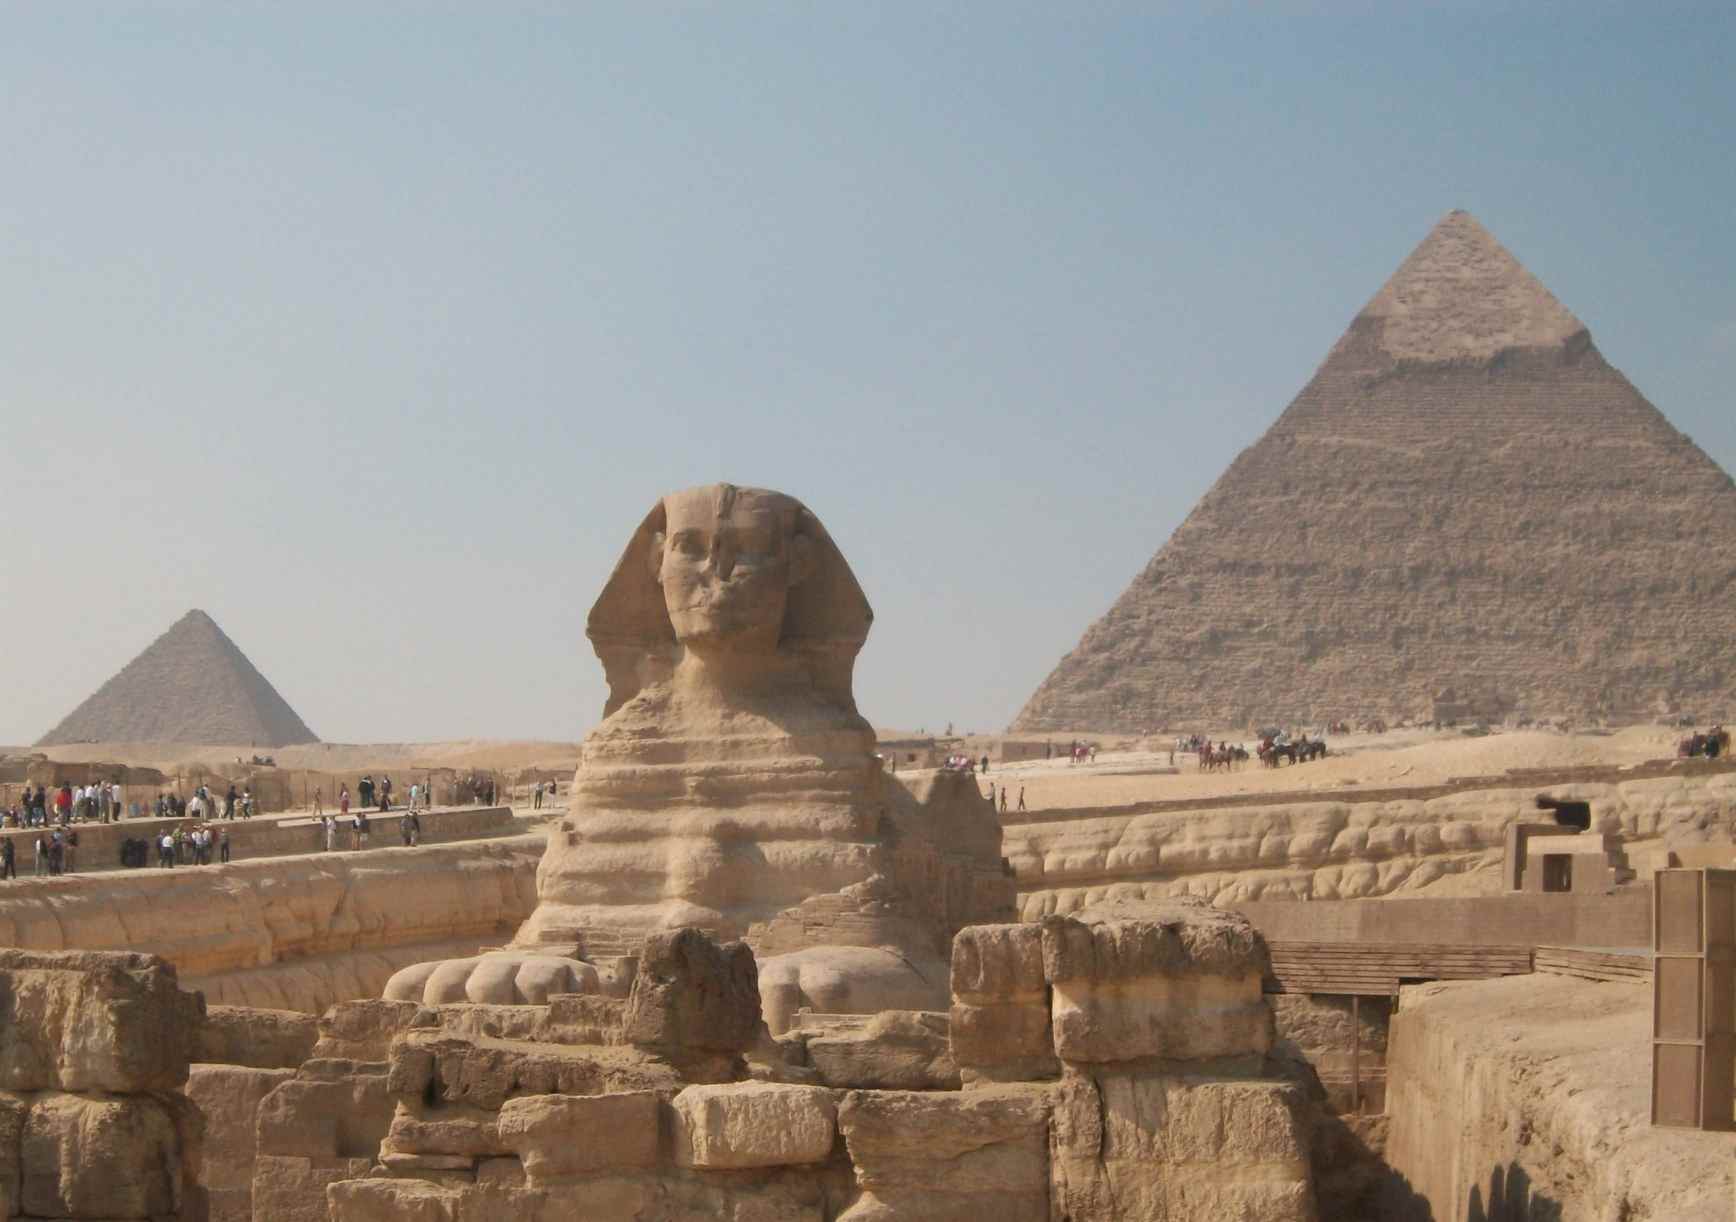 The Great Sphinx of Egypt is one of the most important places of tourism in Egypt, Cairo